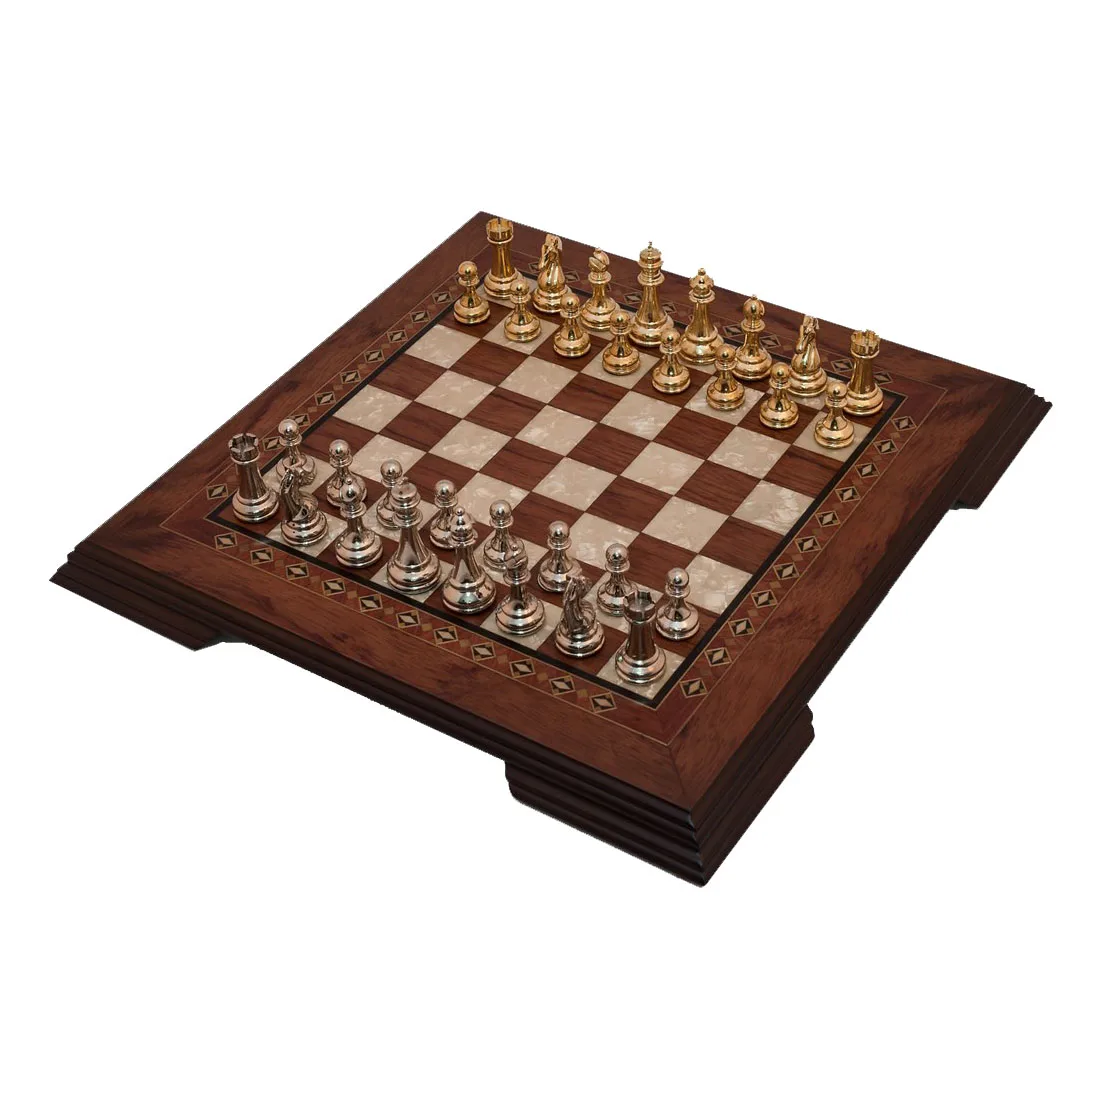 Solid Walnut Wood Chess Game Set - With Metal Figure - Footed Mosaic Engraved Chessboard Gift Items Шахматы шахматы на острове